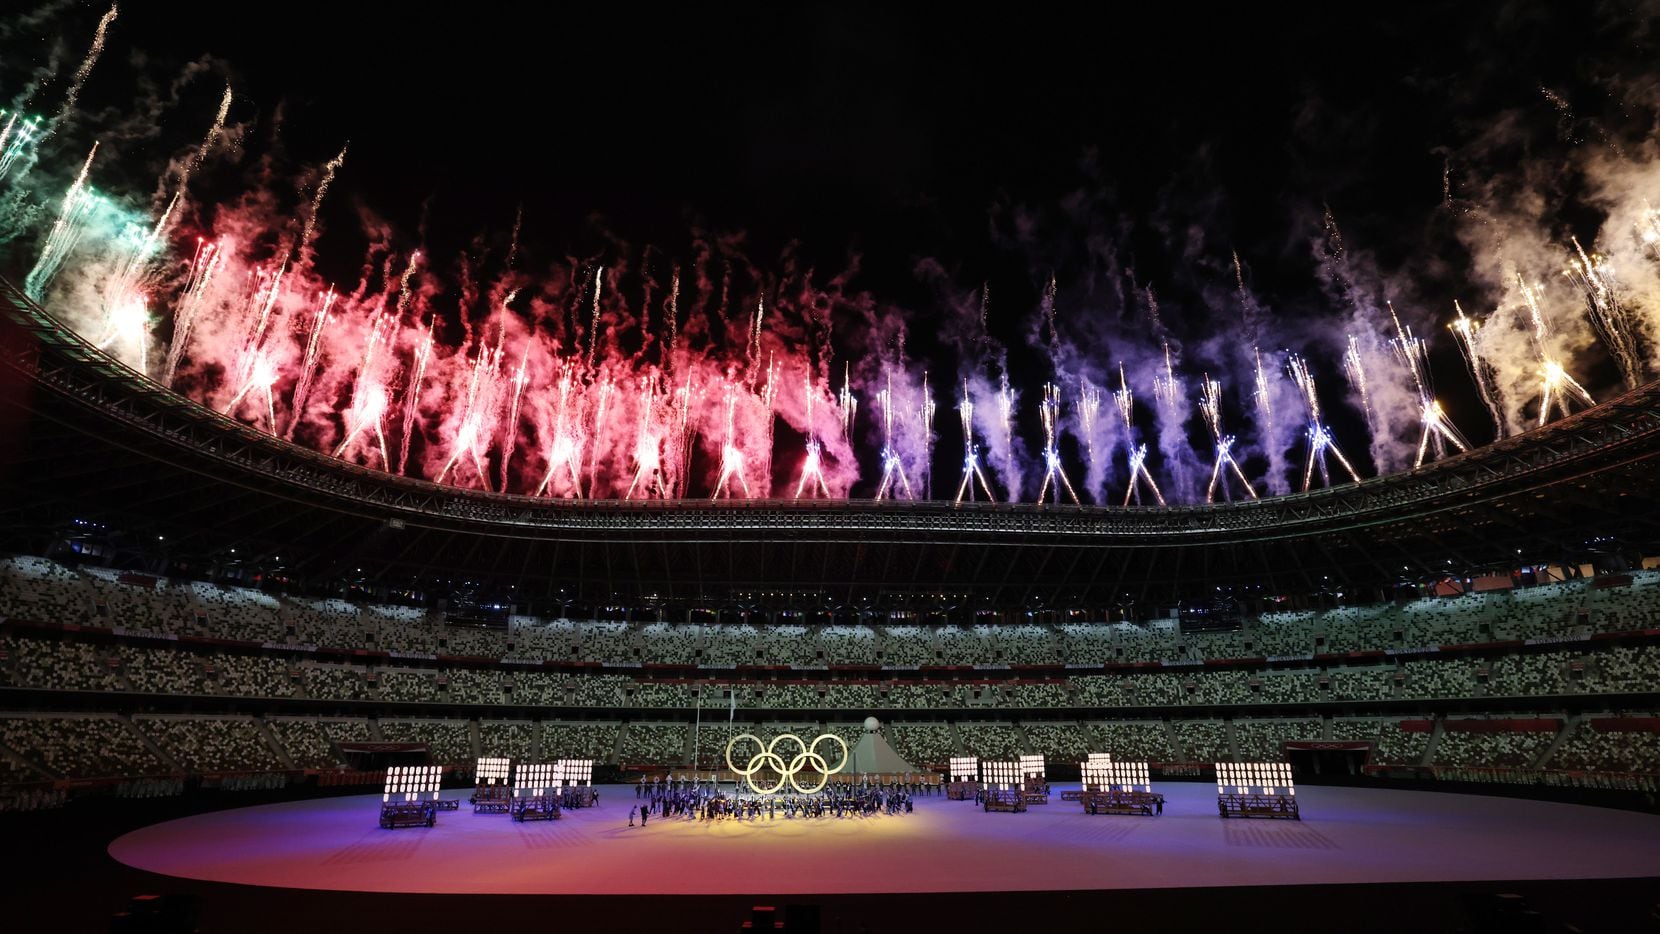 Fireworks go off as the Olympic rings are shown during the opening ceremony for the postponed 2020 Tokyo Olympics at Olympic Stadium on Friday, July 23, 2021, in Tokyo, Japan.